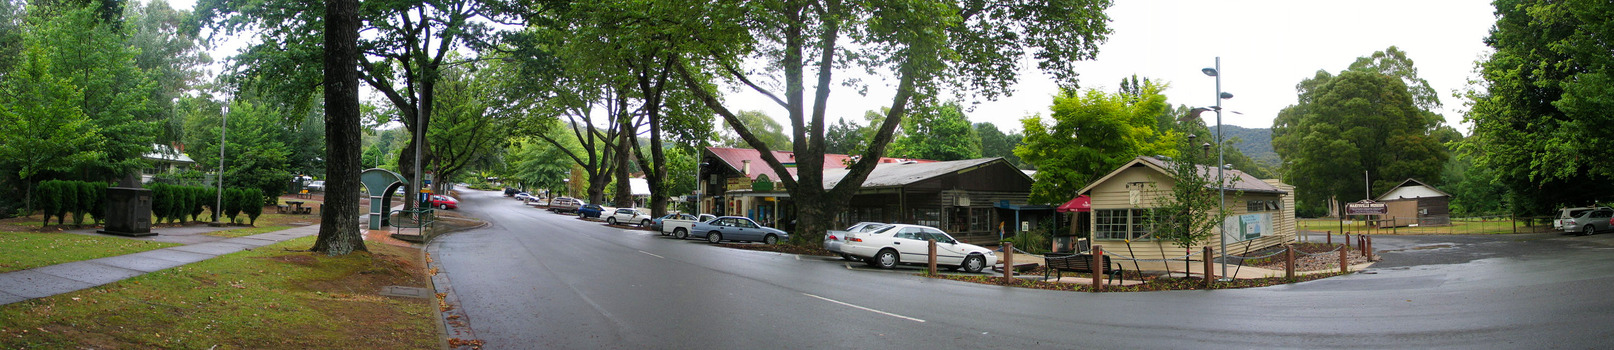 Shows Murchison Street in Marysville in Victoria. Shows the view looking up Murchison Street. In the left of the photograph is The Corner Cupboard Cafe along with other building set along the street.